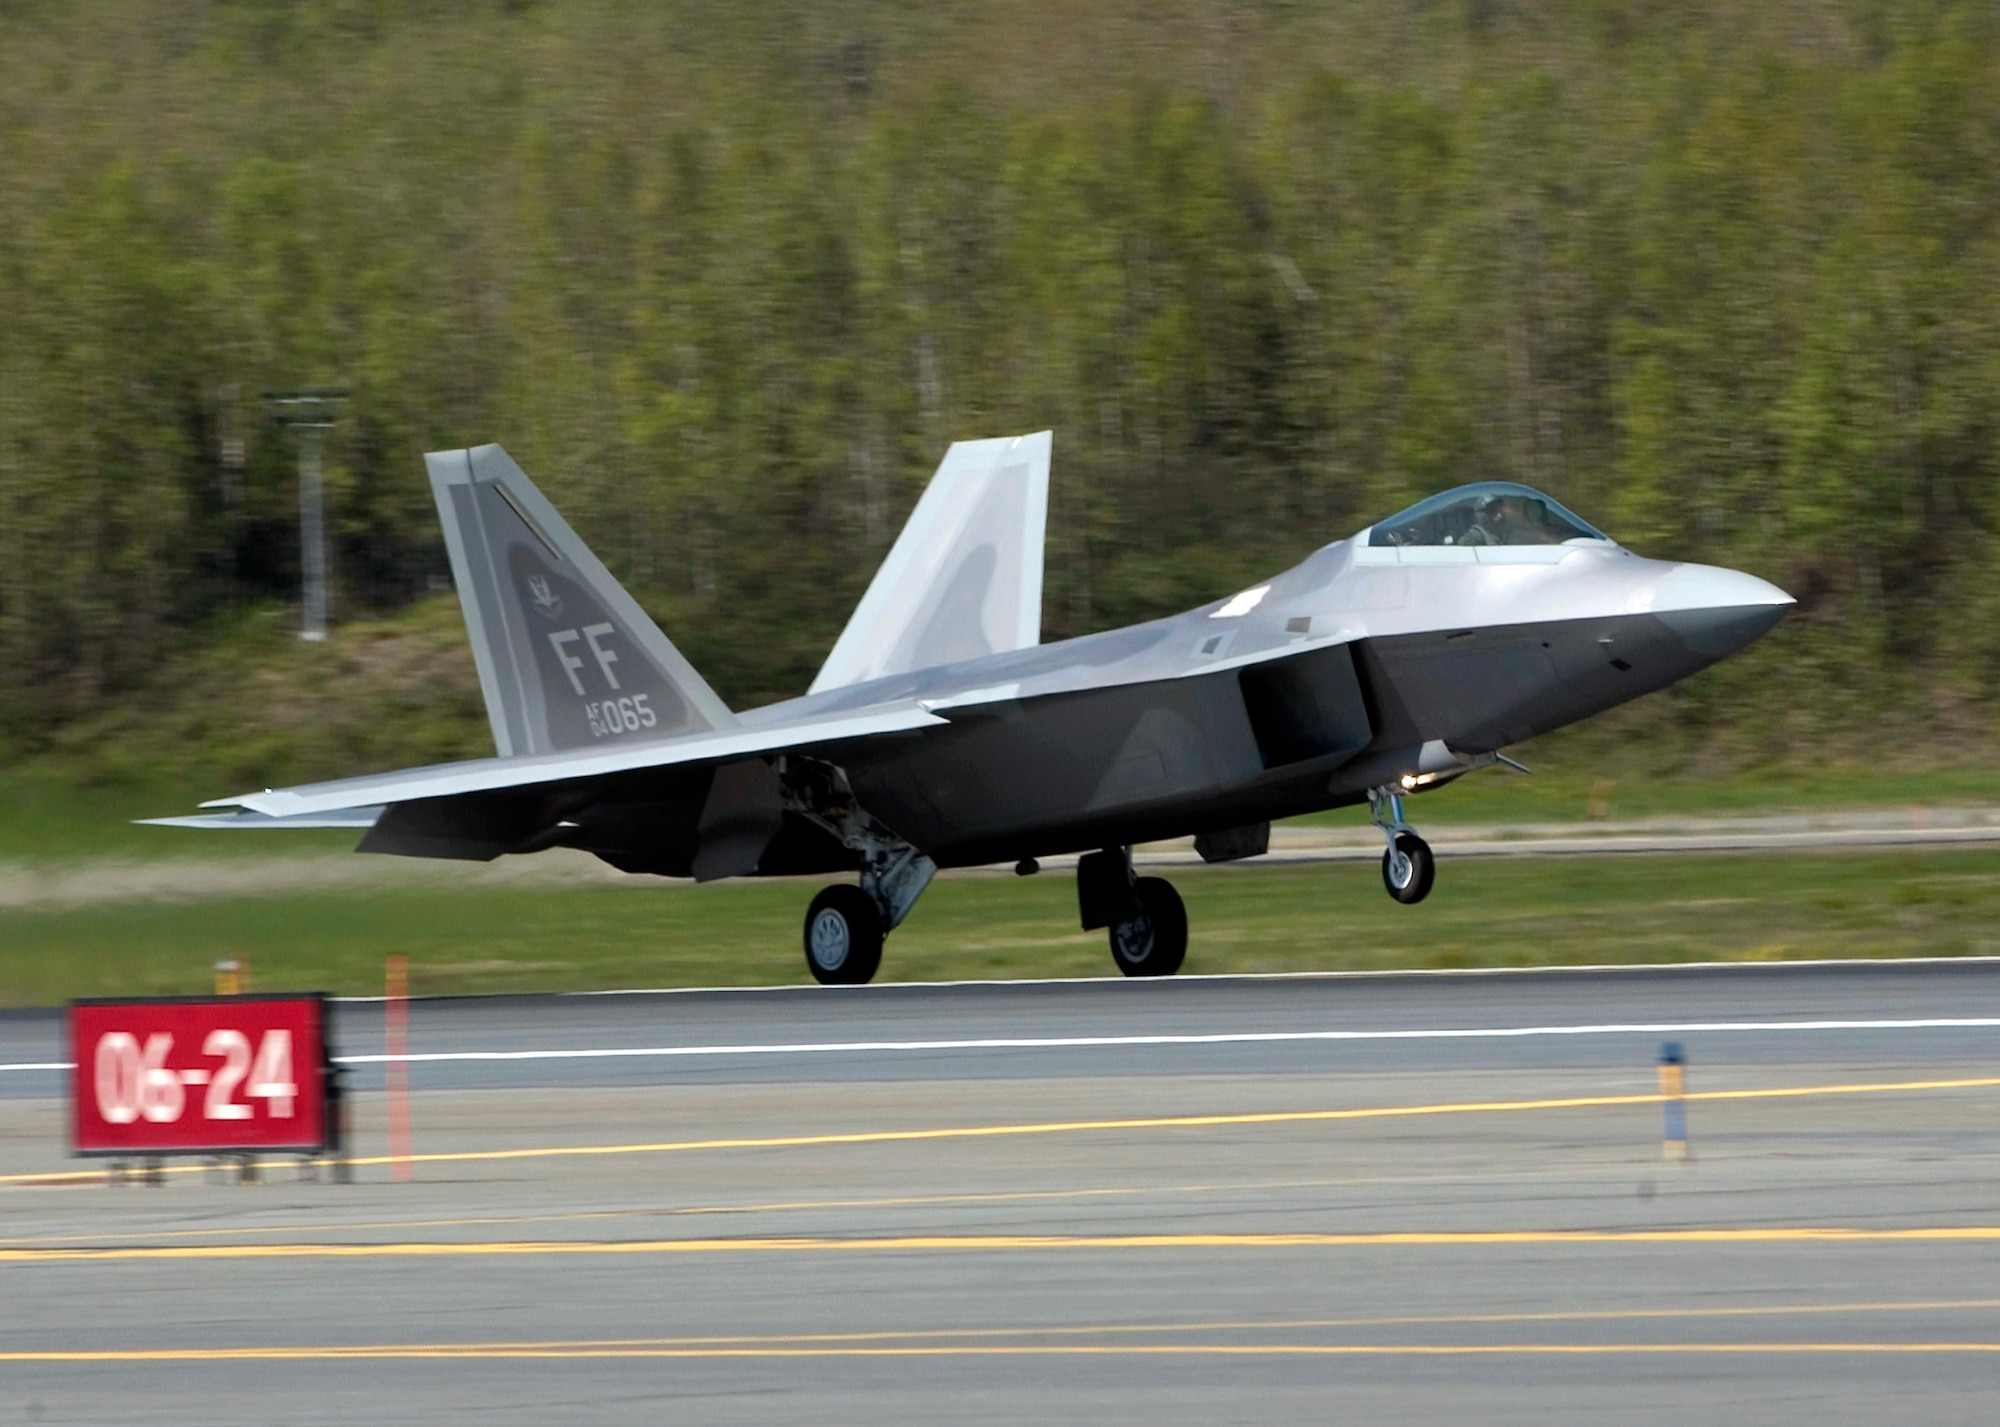 An F-22 Raptor lands at Elmendorf Air Force Base, Alaska, on Tuesday, May 23, 2006. Raptors from the 27th Fighter Squadron at Langley AFB, Va., are supporting Exercise Northern Edge 2006. The Air Force selected Elmendorf as the home for the next operational F-22 squadron. The base will receive 36 Raptors, with the first jet expected in fall 2007. (U.S. Air Force photo/Tech. Sgt. Keith Brown) 
